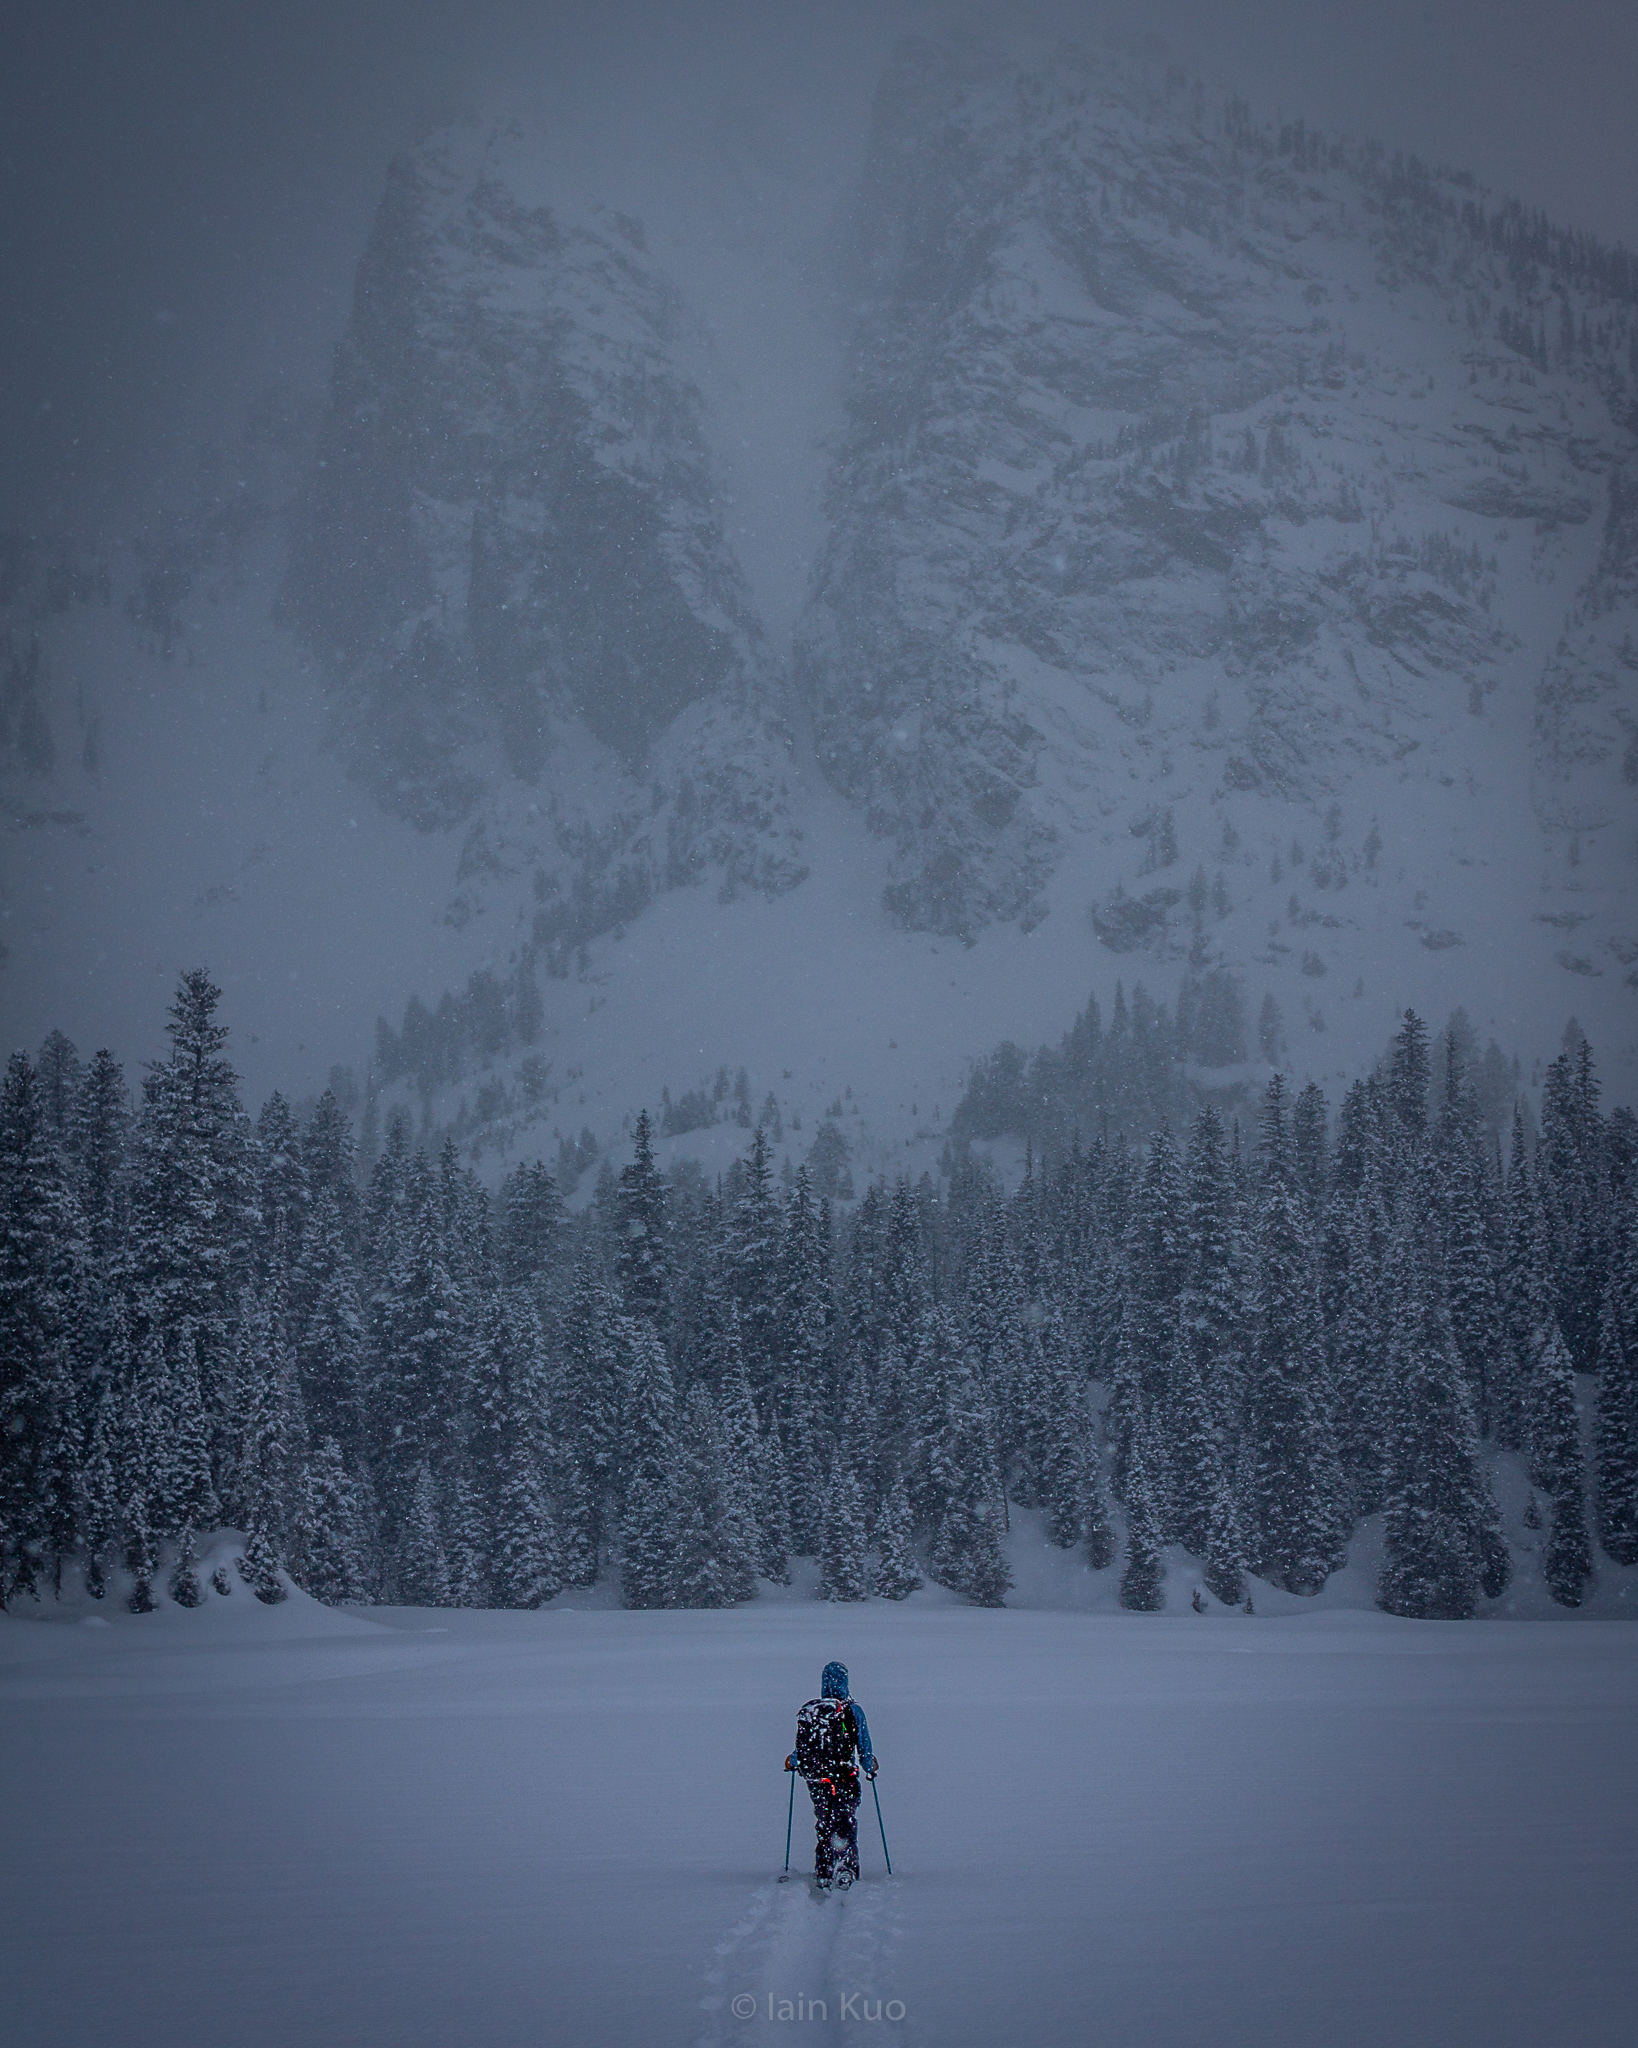 Night time ski expedition in the tetons